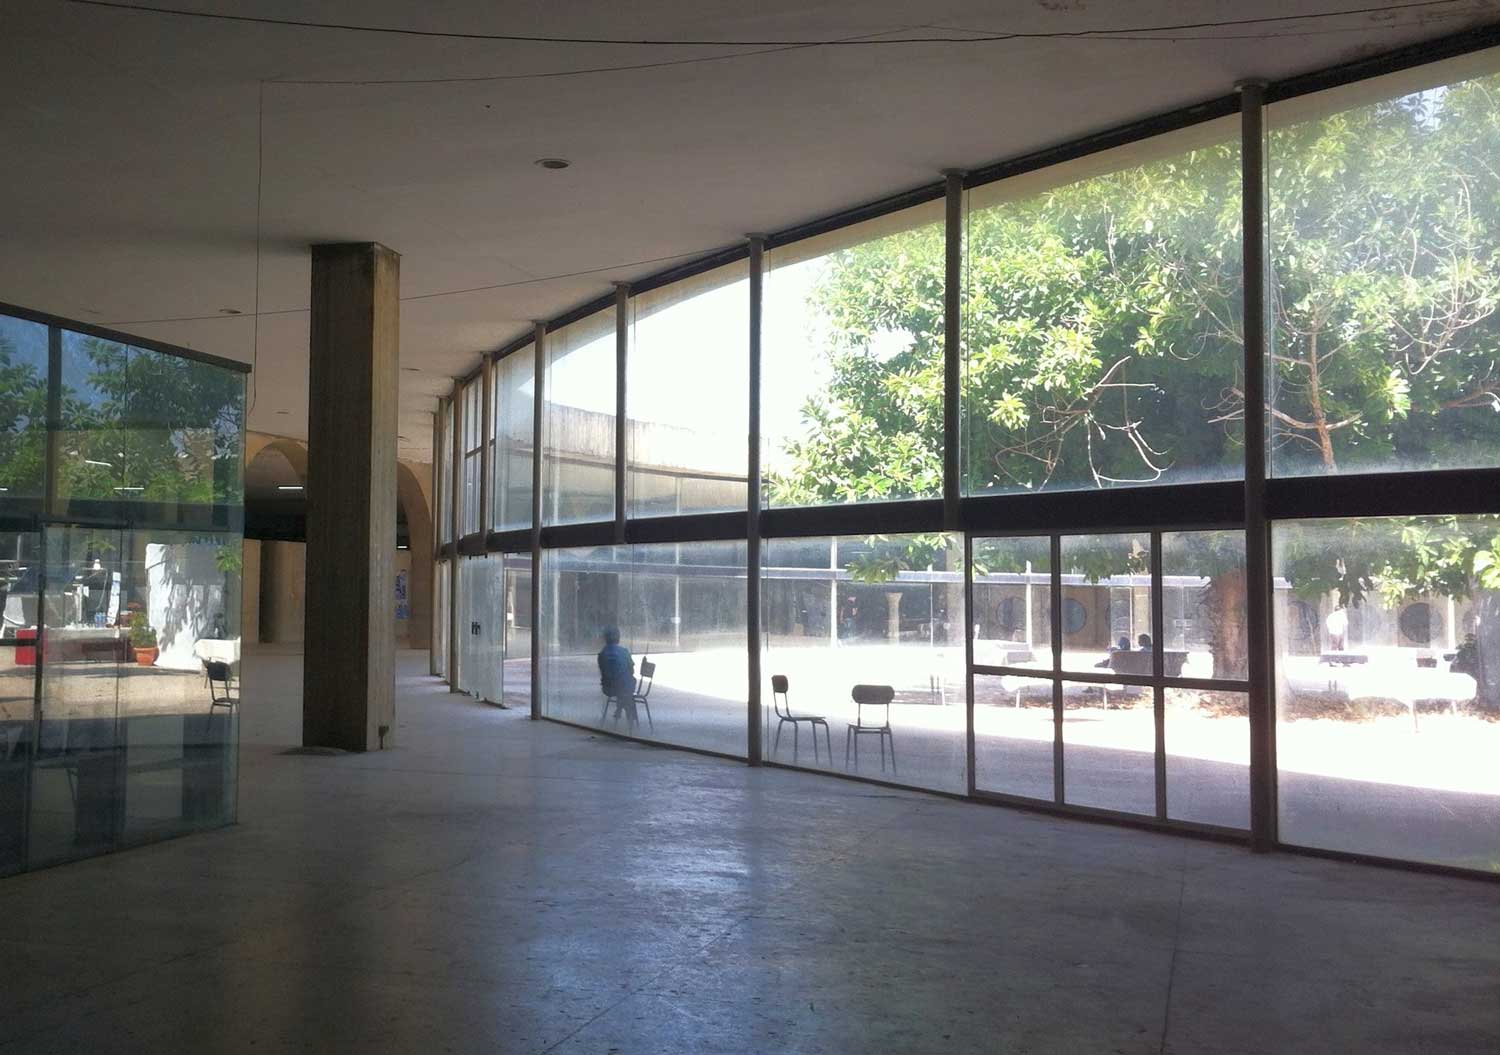 Interior view to courtyard through glass wall